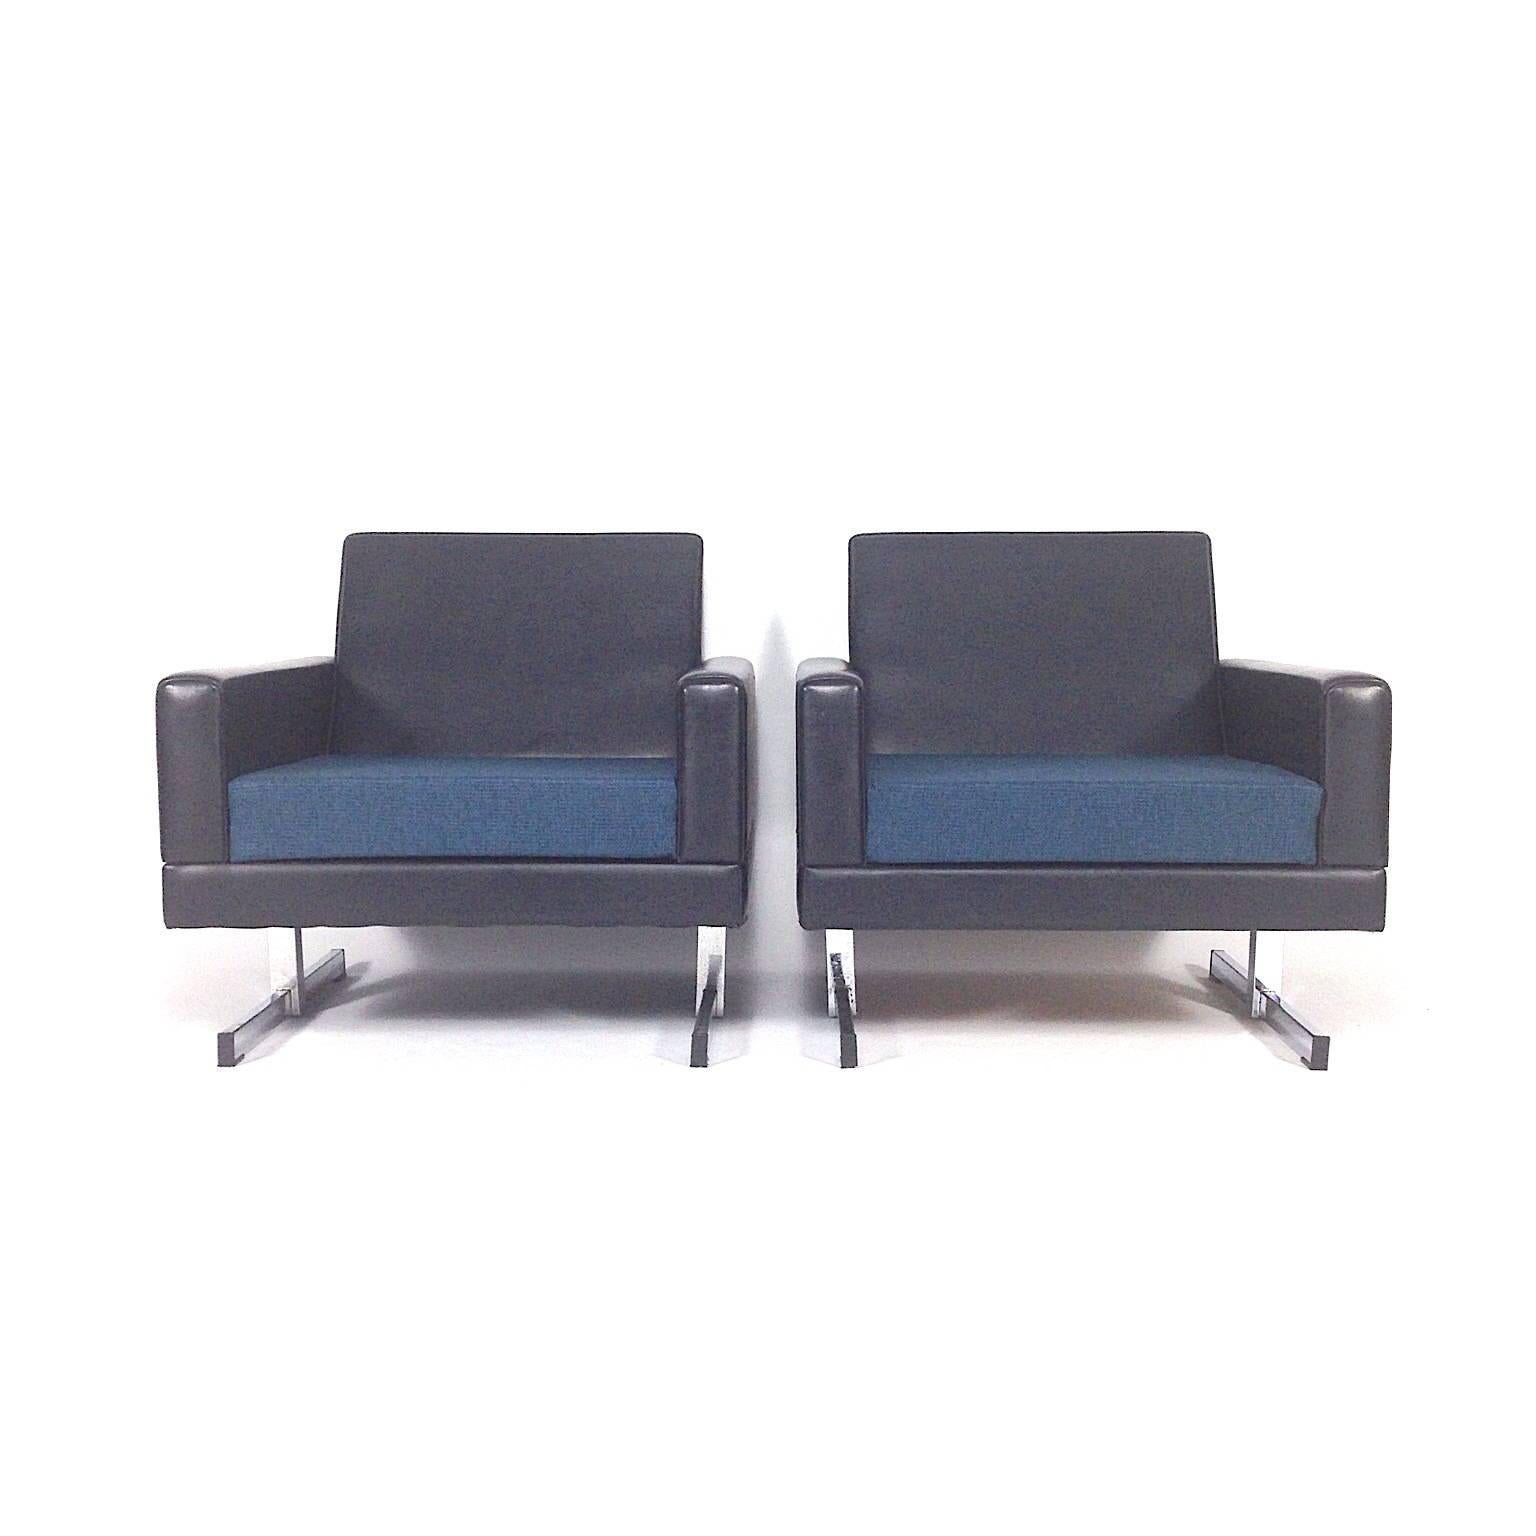 Pair of midcentury Dutch or German design club lounge chairs with new fabric cushions. 
They are made black faux leather and chromed metal feet.